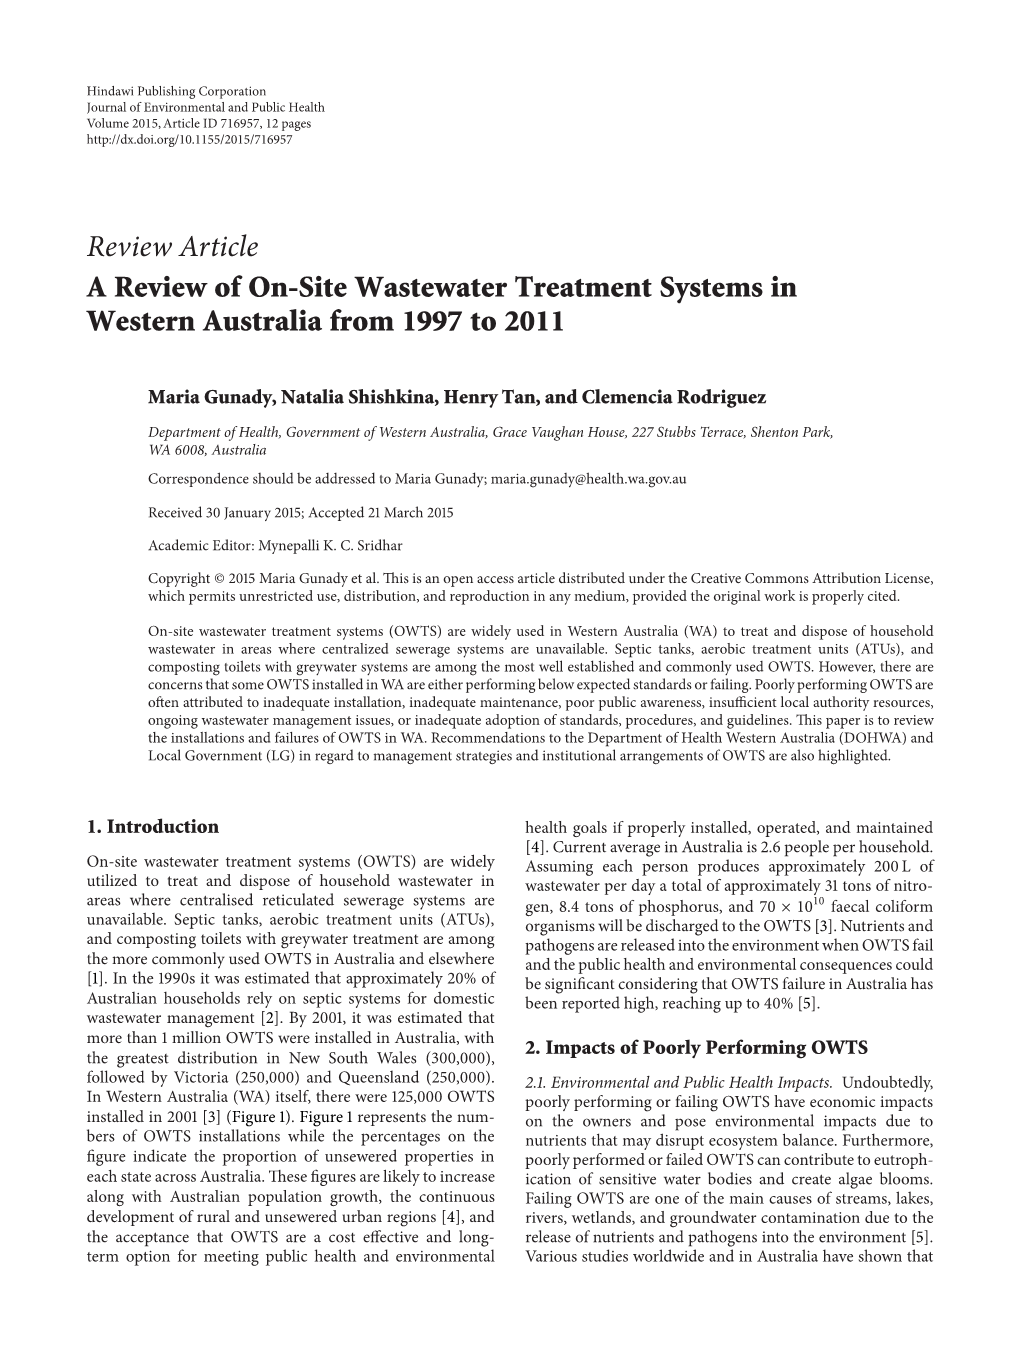 A Review of On-Site Wastewater Treatment Systems in Western Australia from 1997 to 2011